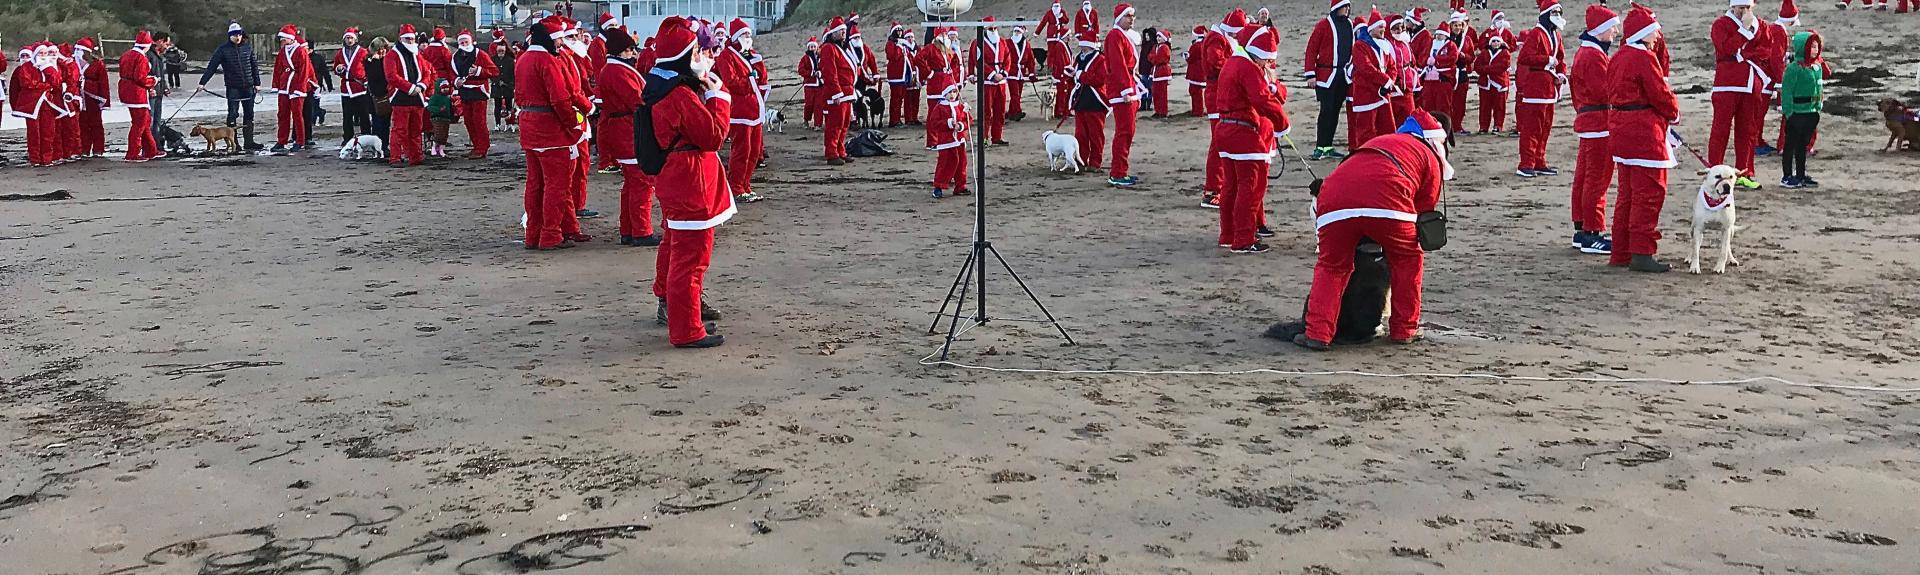 Santa Claus's limber up for the start of a Santa Fun Run on Woolacombe Sands in North Devon